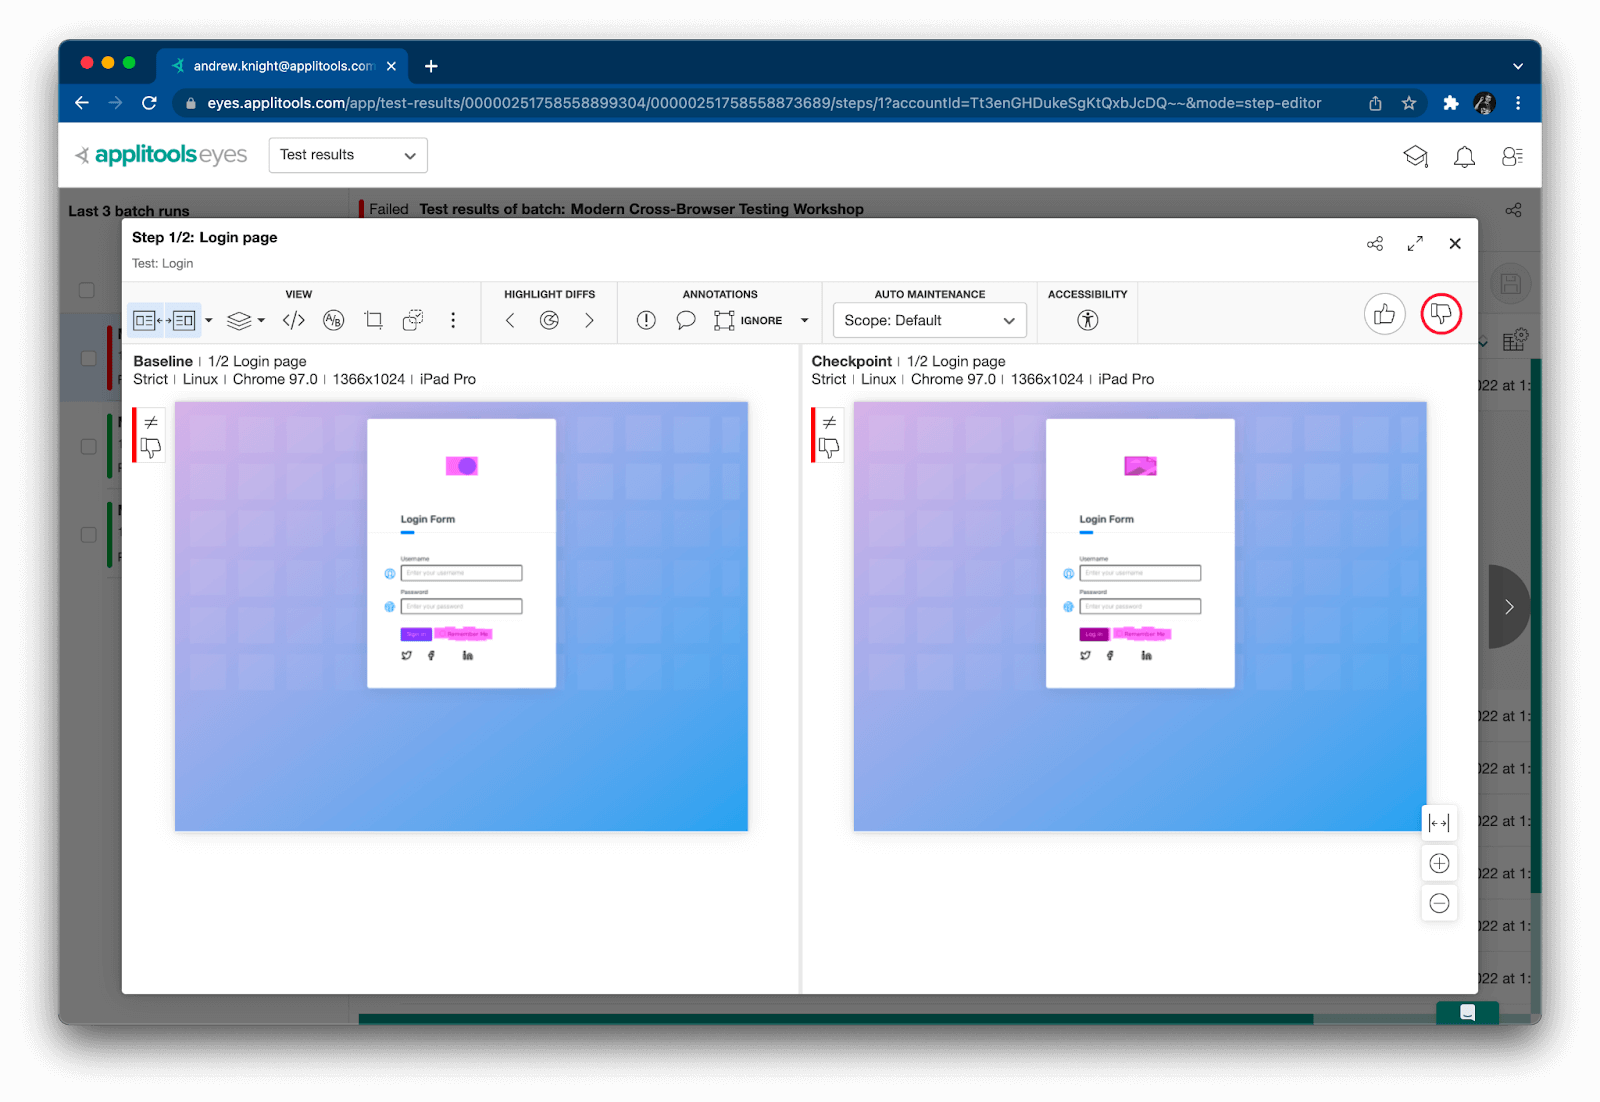 Applitools dashboard showing comparison window, which highlights differences.